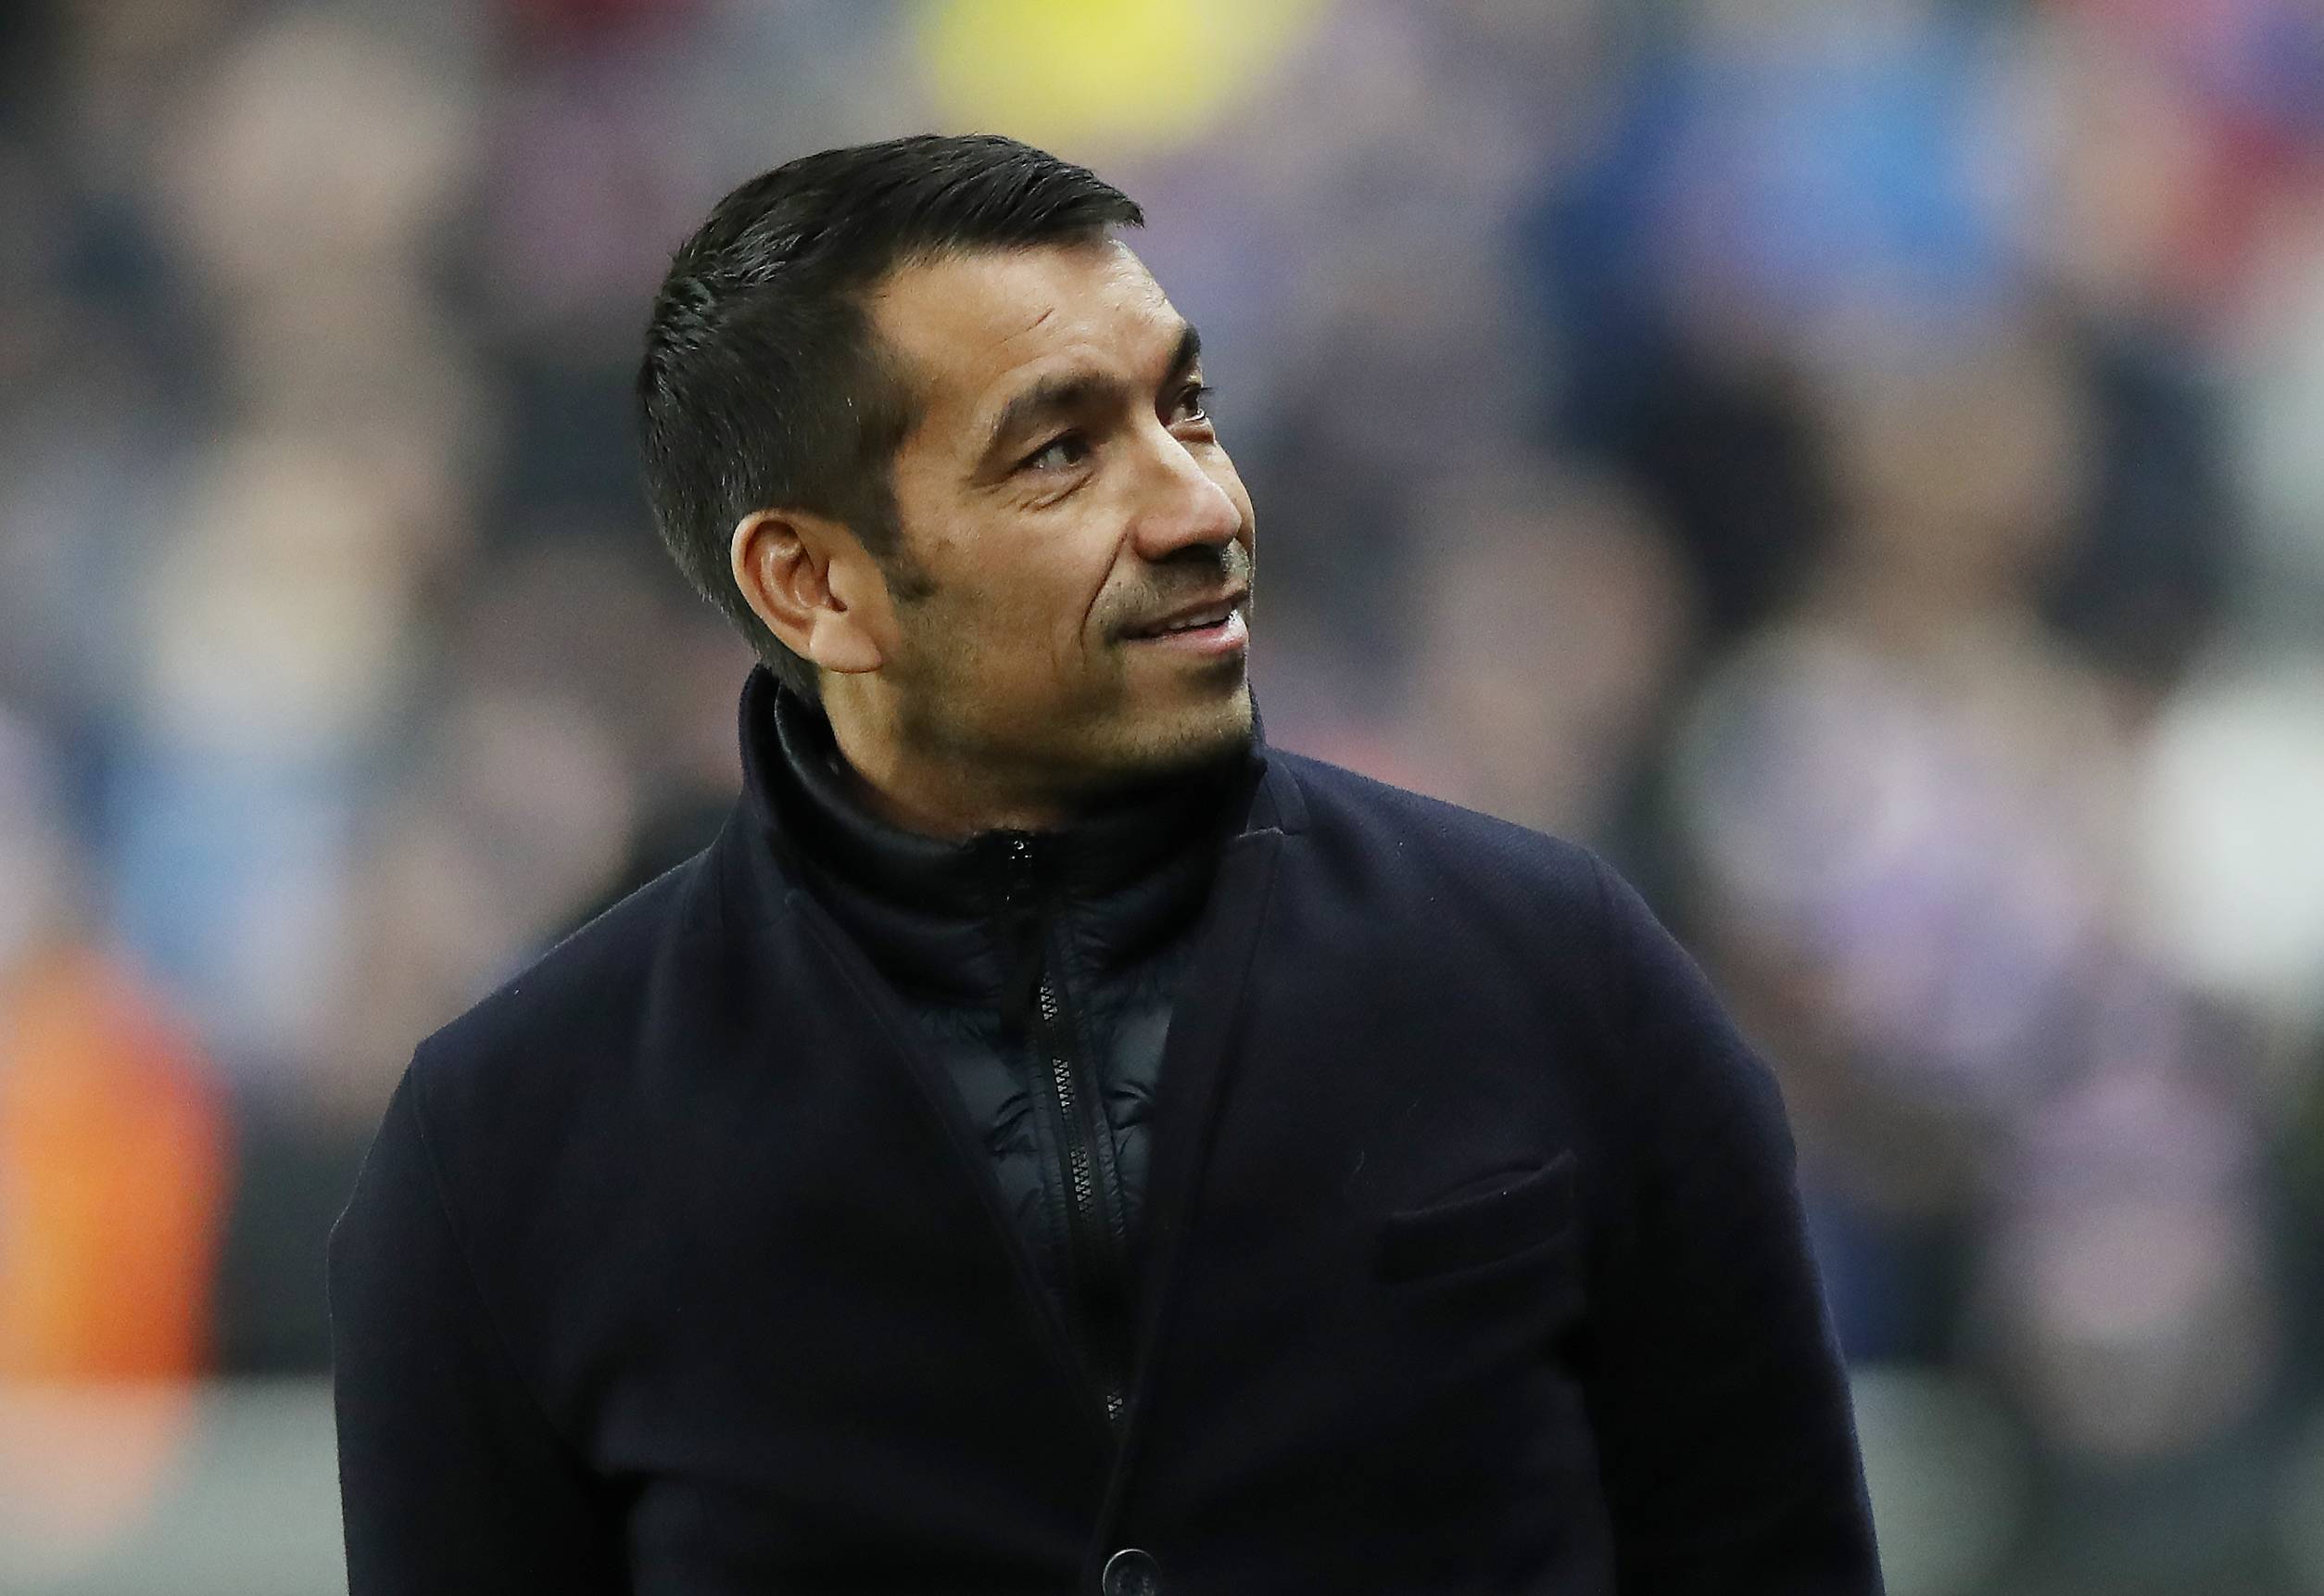 GLASGOW, SCOTLAND - FEBRUARY 24: Rangers manager Giovanni van Bronckhorst is seen during the UEFA Europa League Knockout Round Play-Offs Leg Two match between Rangers FC and Borussia Dortmund at Ibrox Stadium on February 24, 2022 in Glasgow, Scotland. (Photo by Ian MacNicol/Getty Images)